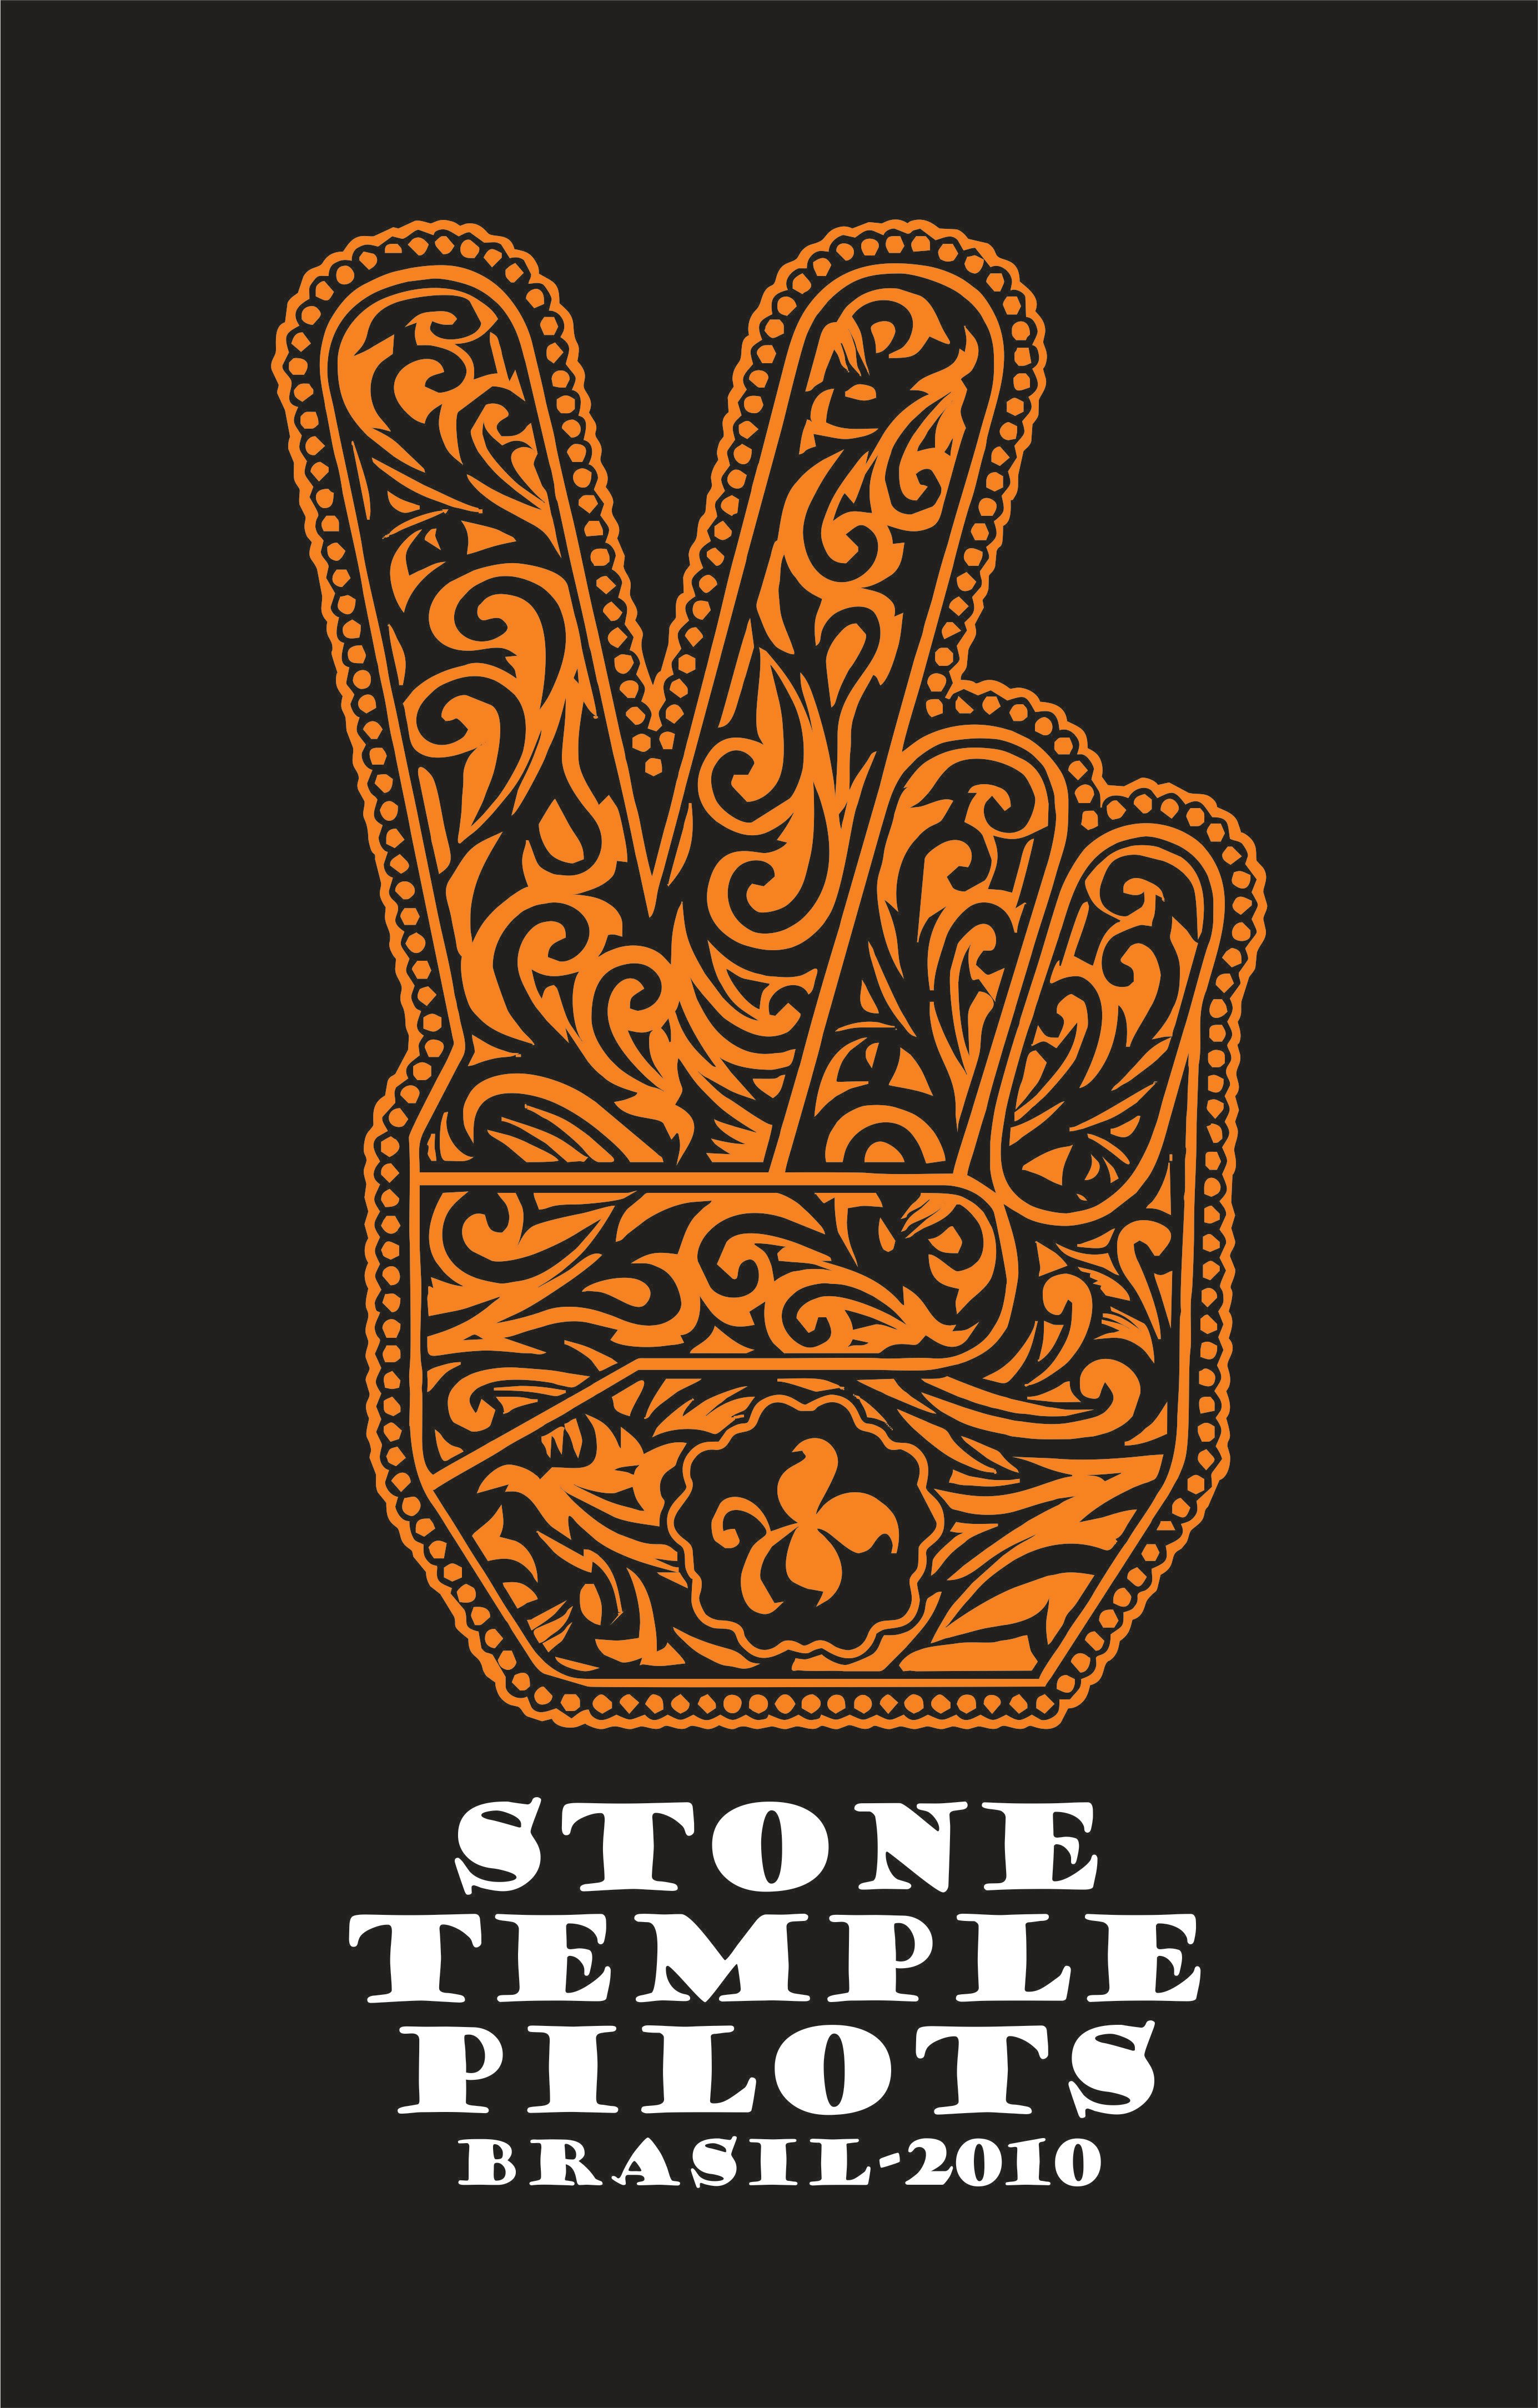 This poster Stone Temple Pilots Brasil 2010